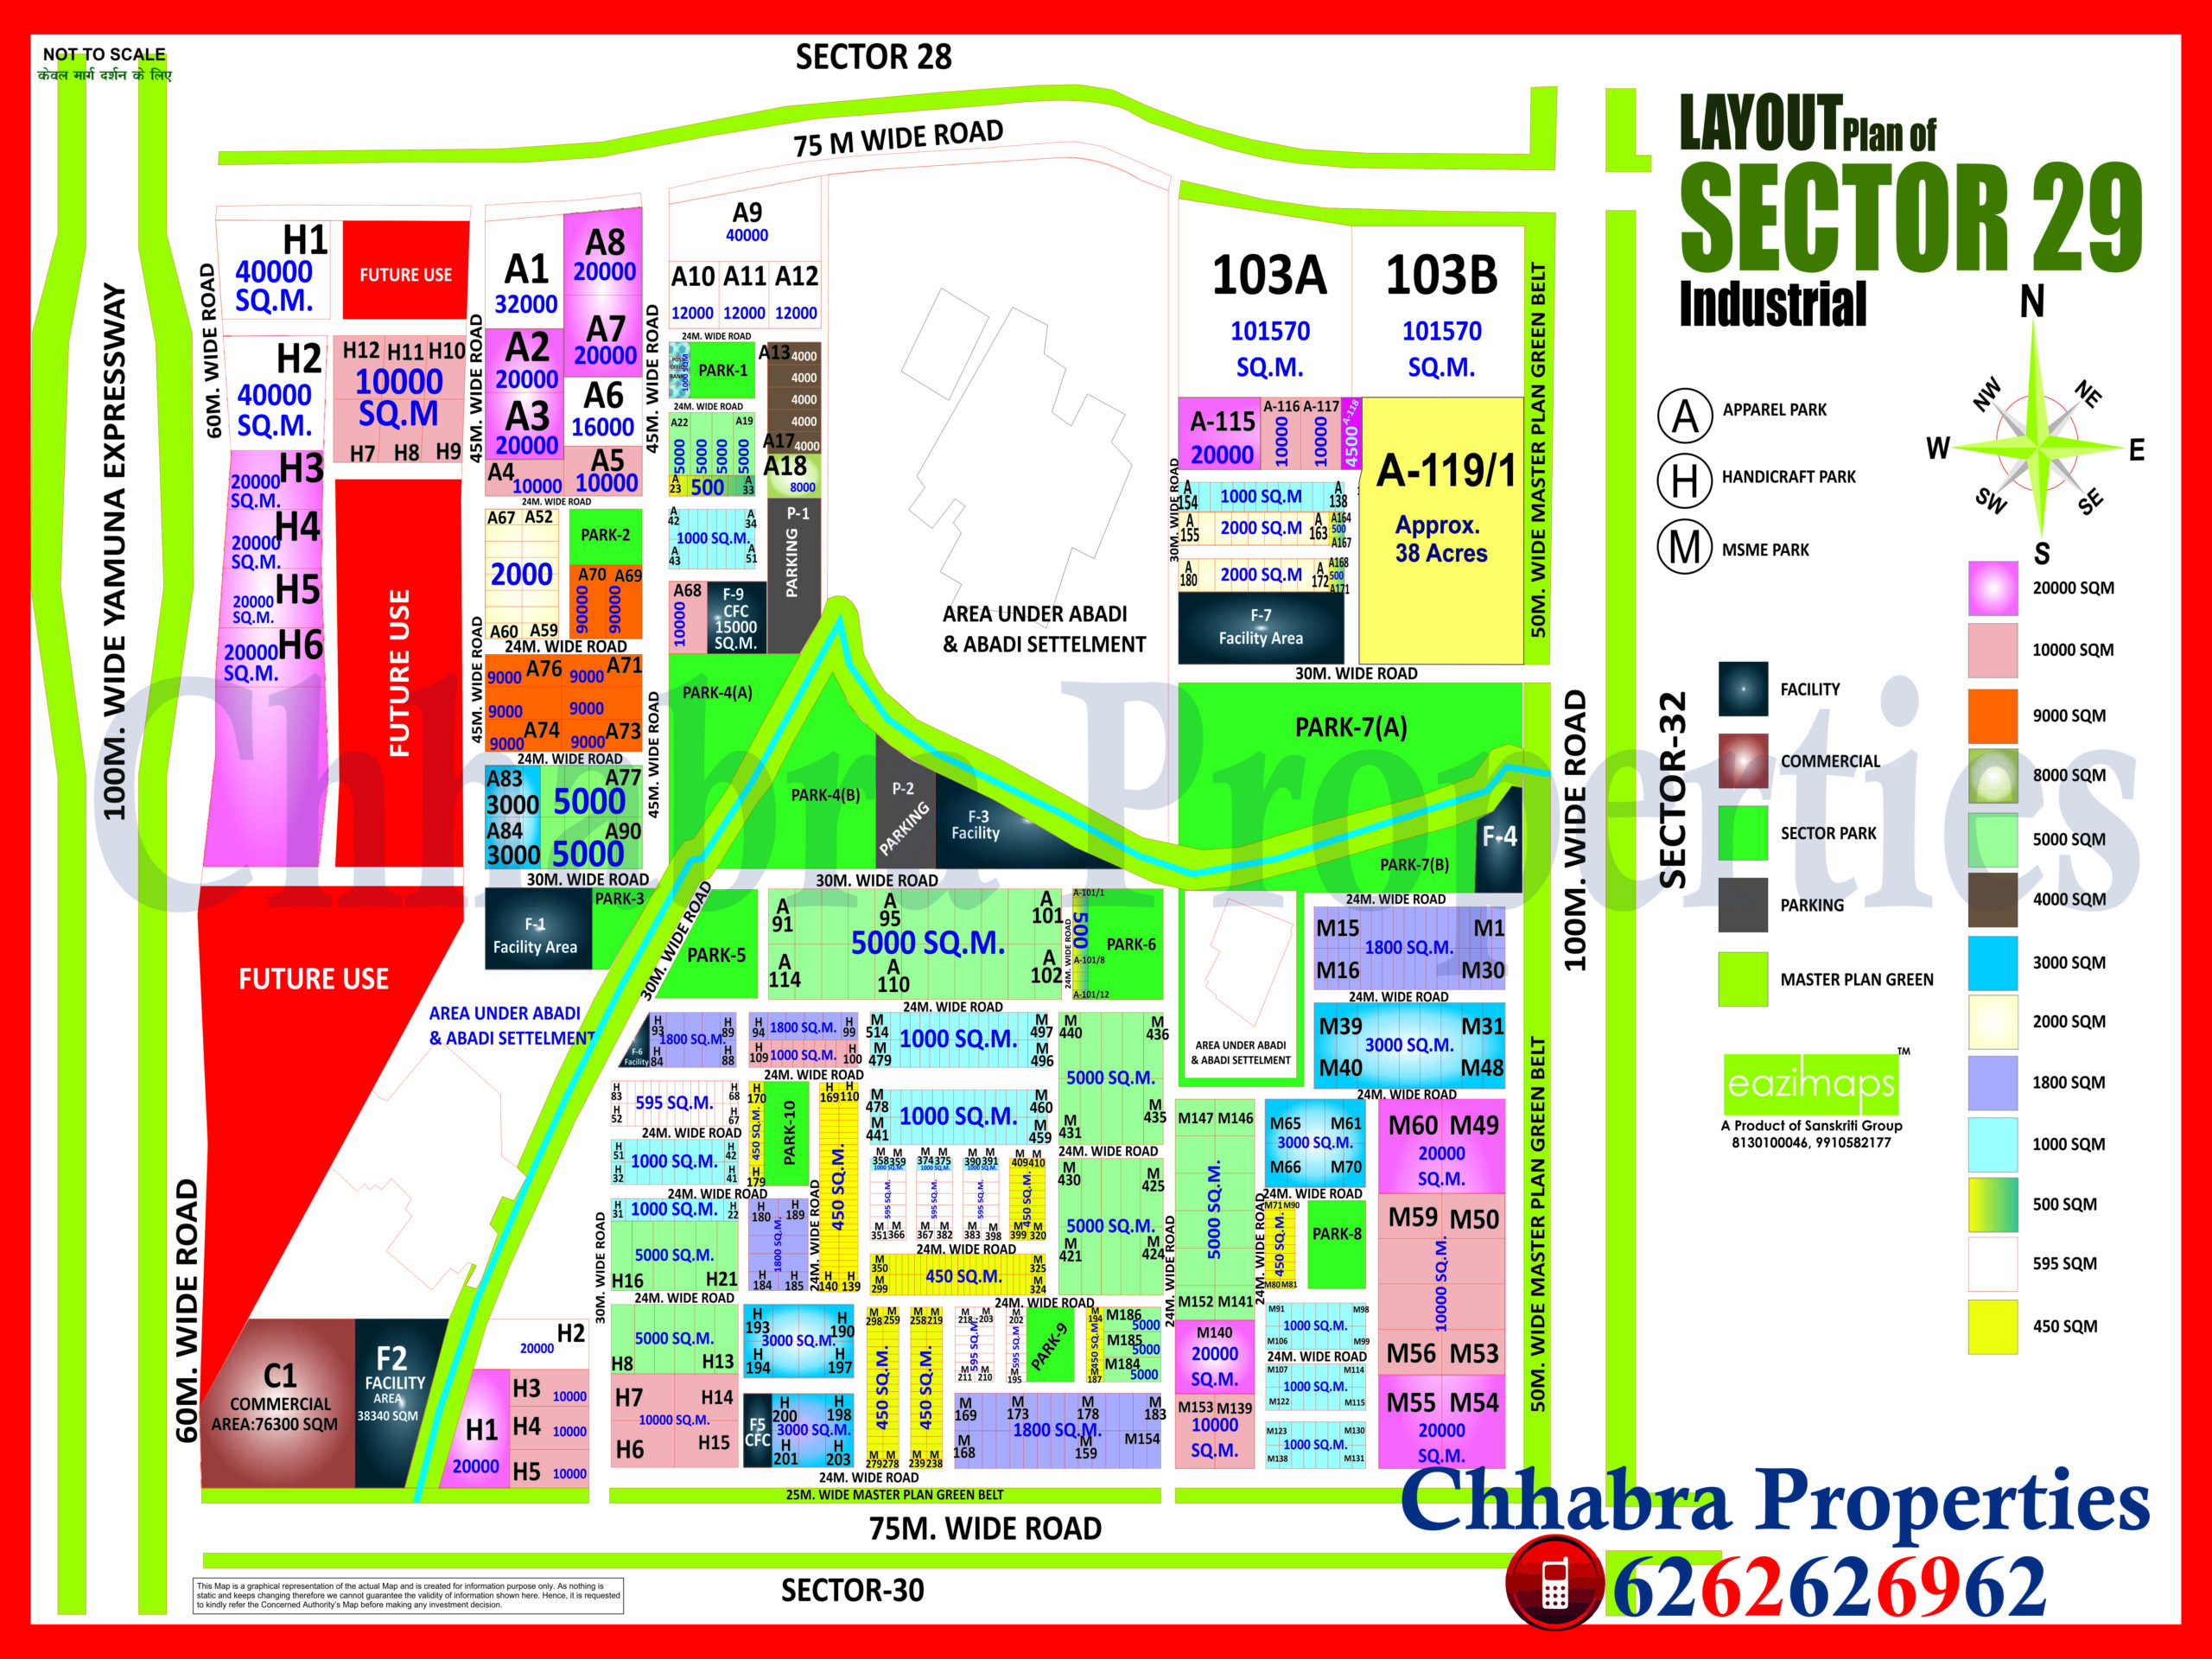 SECTOR 29 INDUSTRIAL Yamuna Expressway Maps